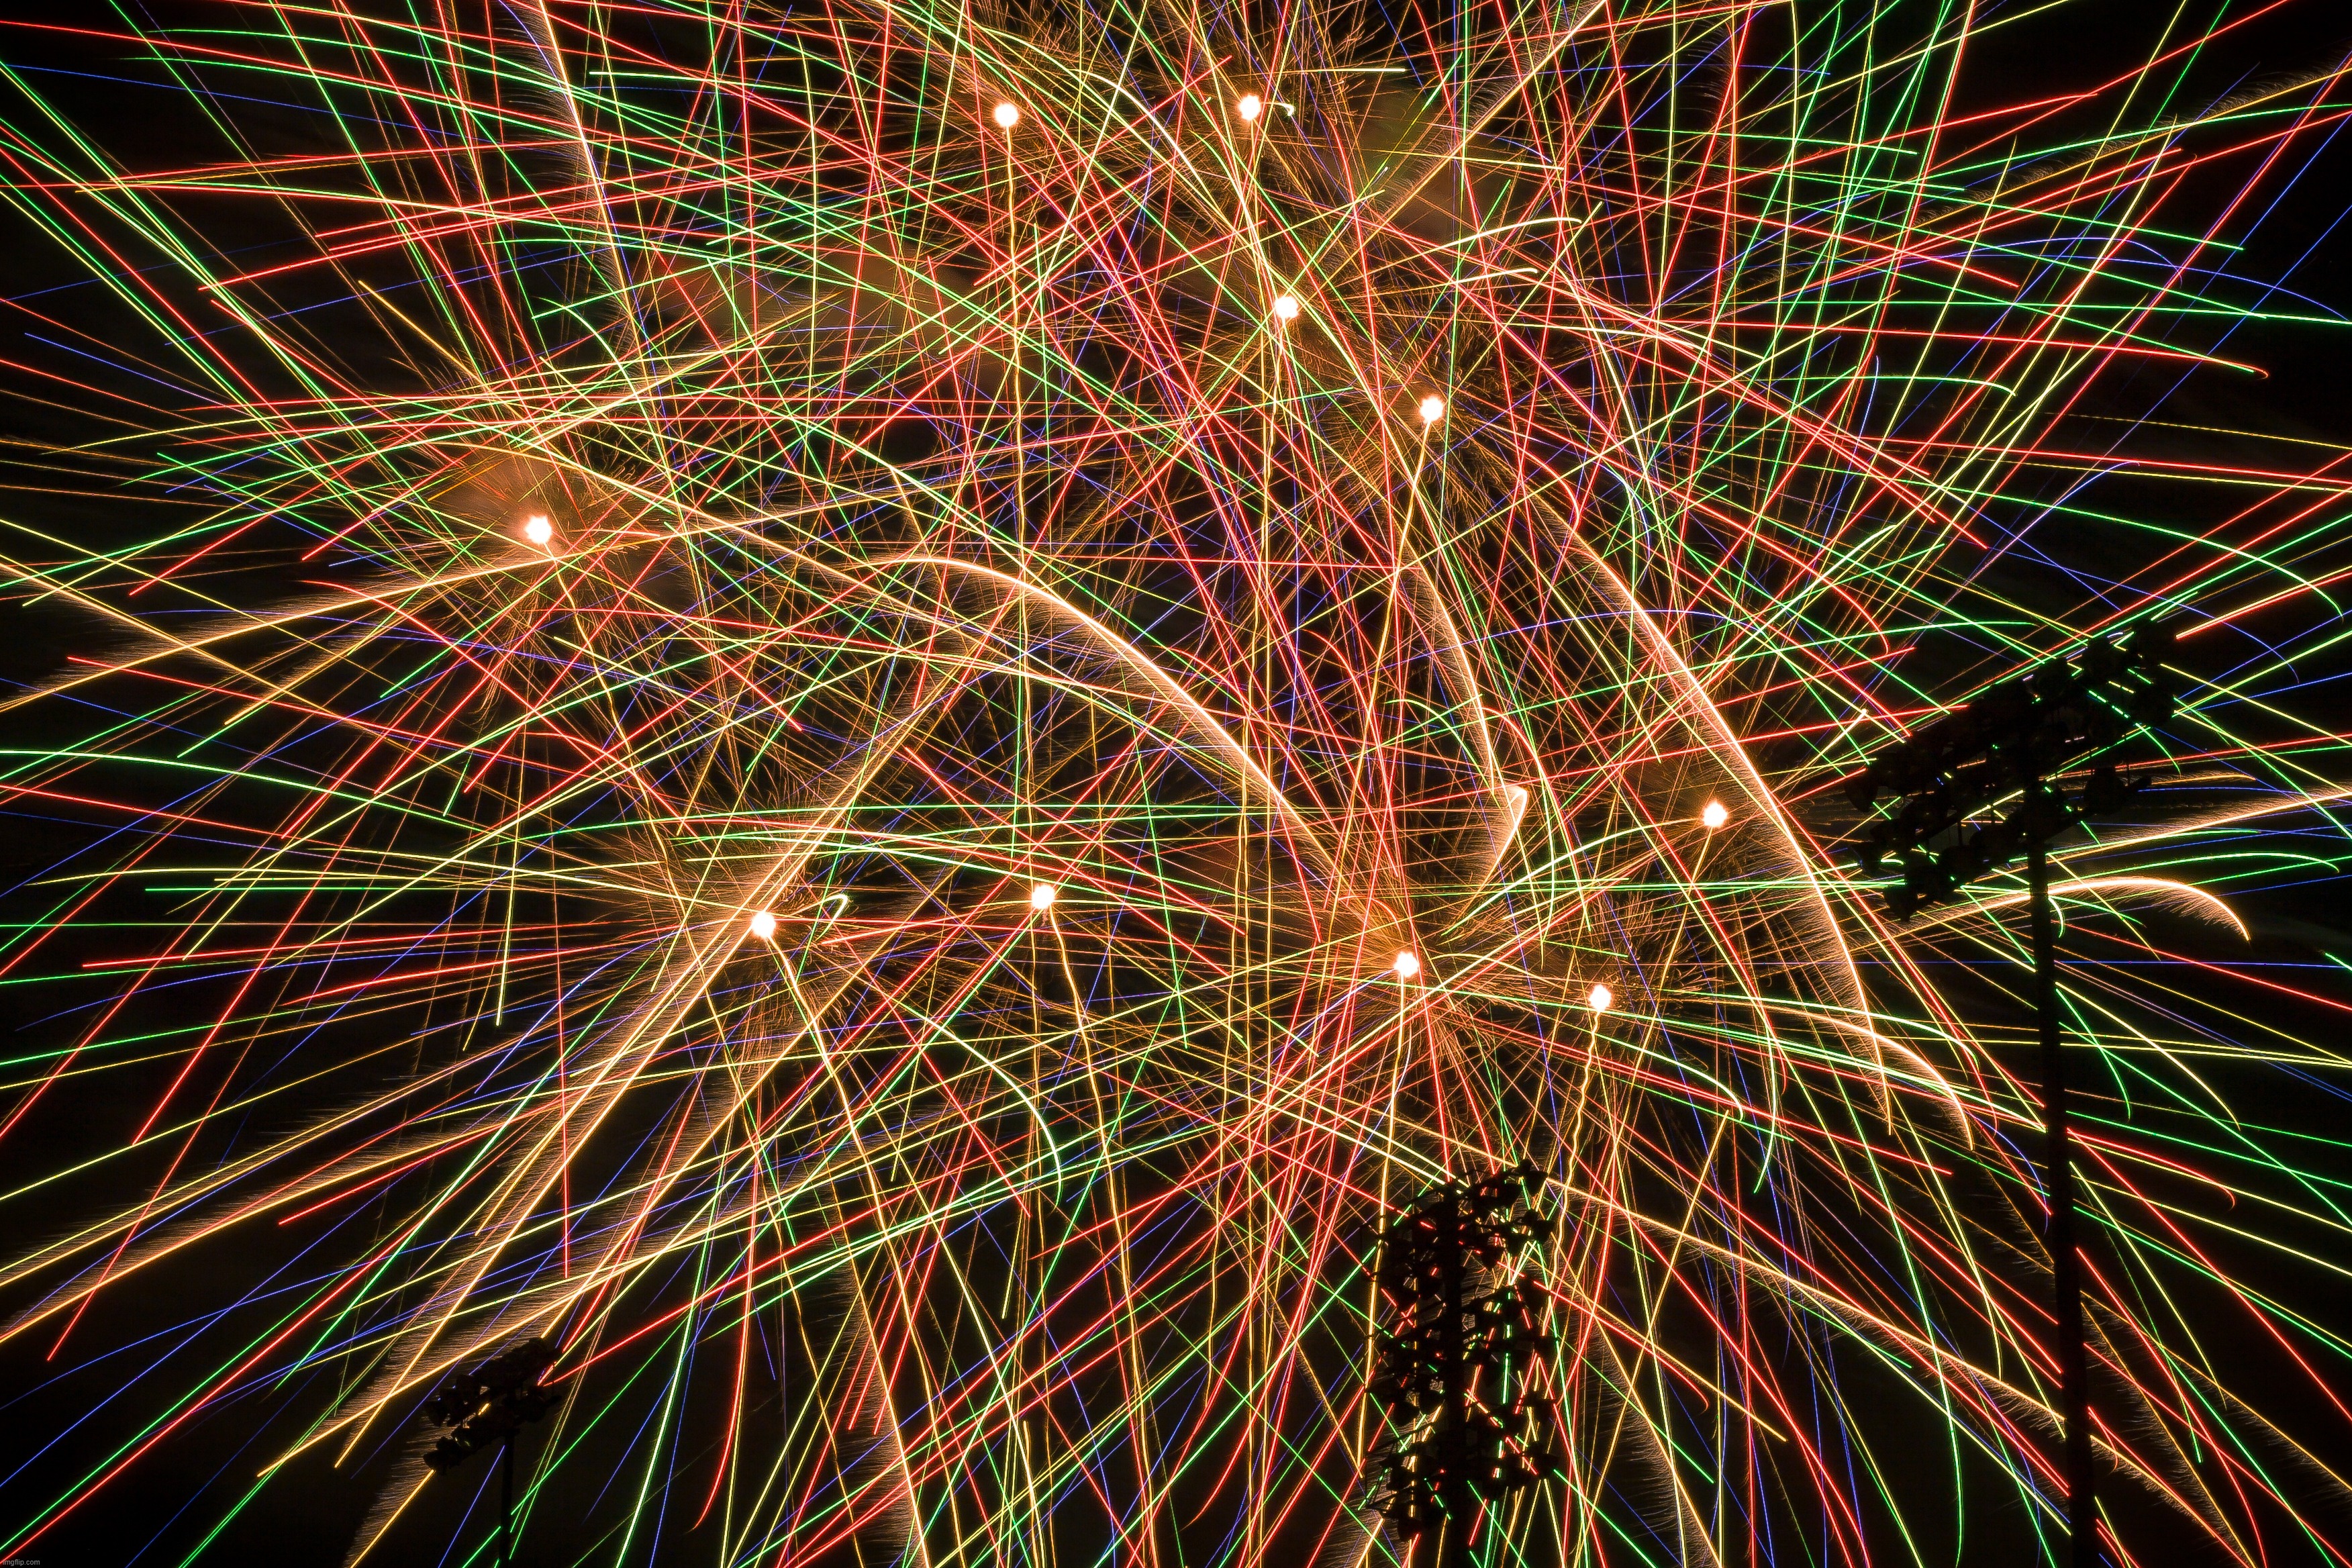 Fireworks Show or Laser Pink Floyd - You Decide! | image tagged in original photography,egos,fireworks,long exposure | made w/ Imgflip meme maker